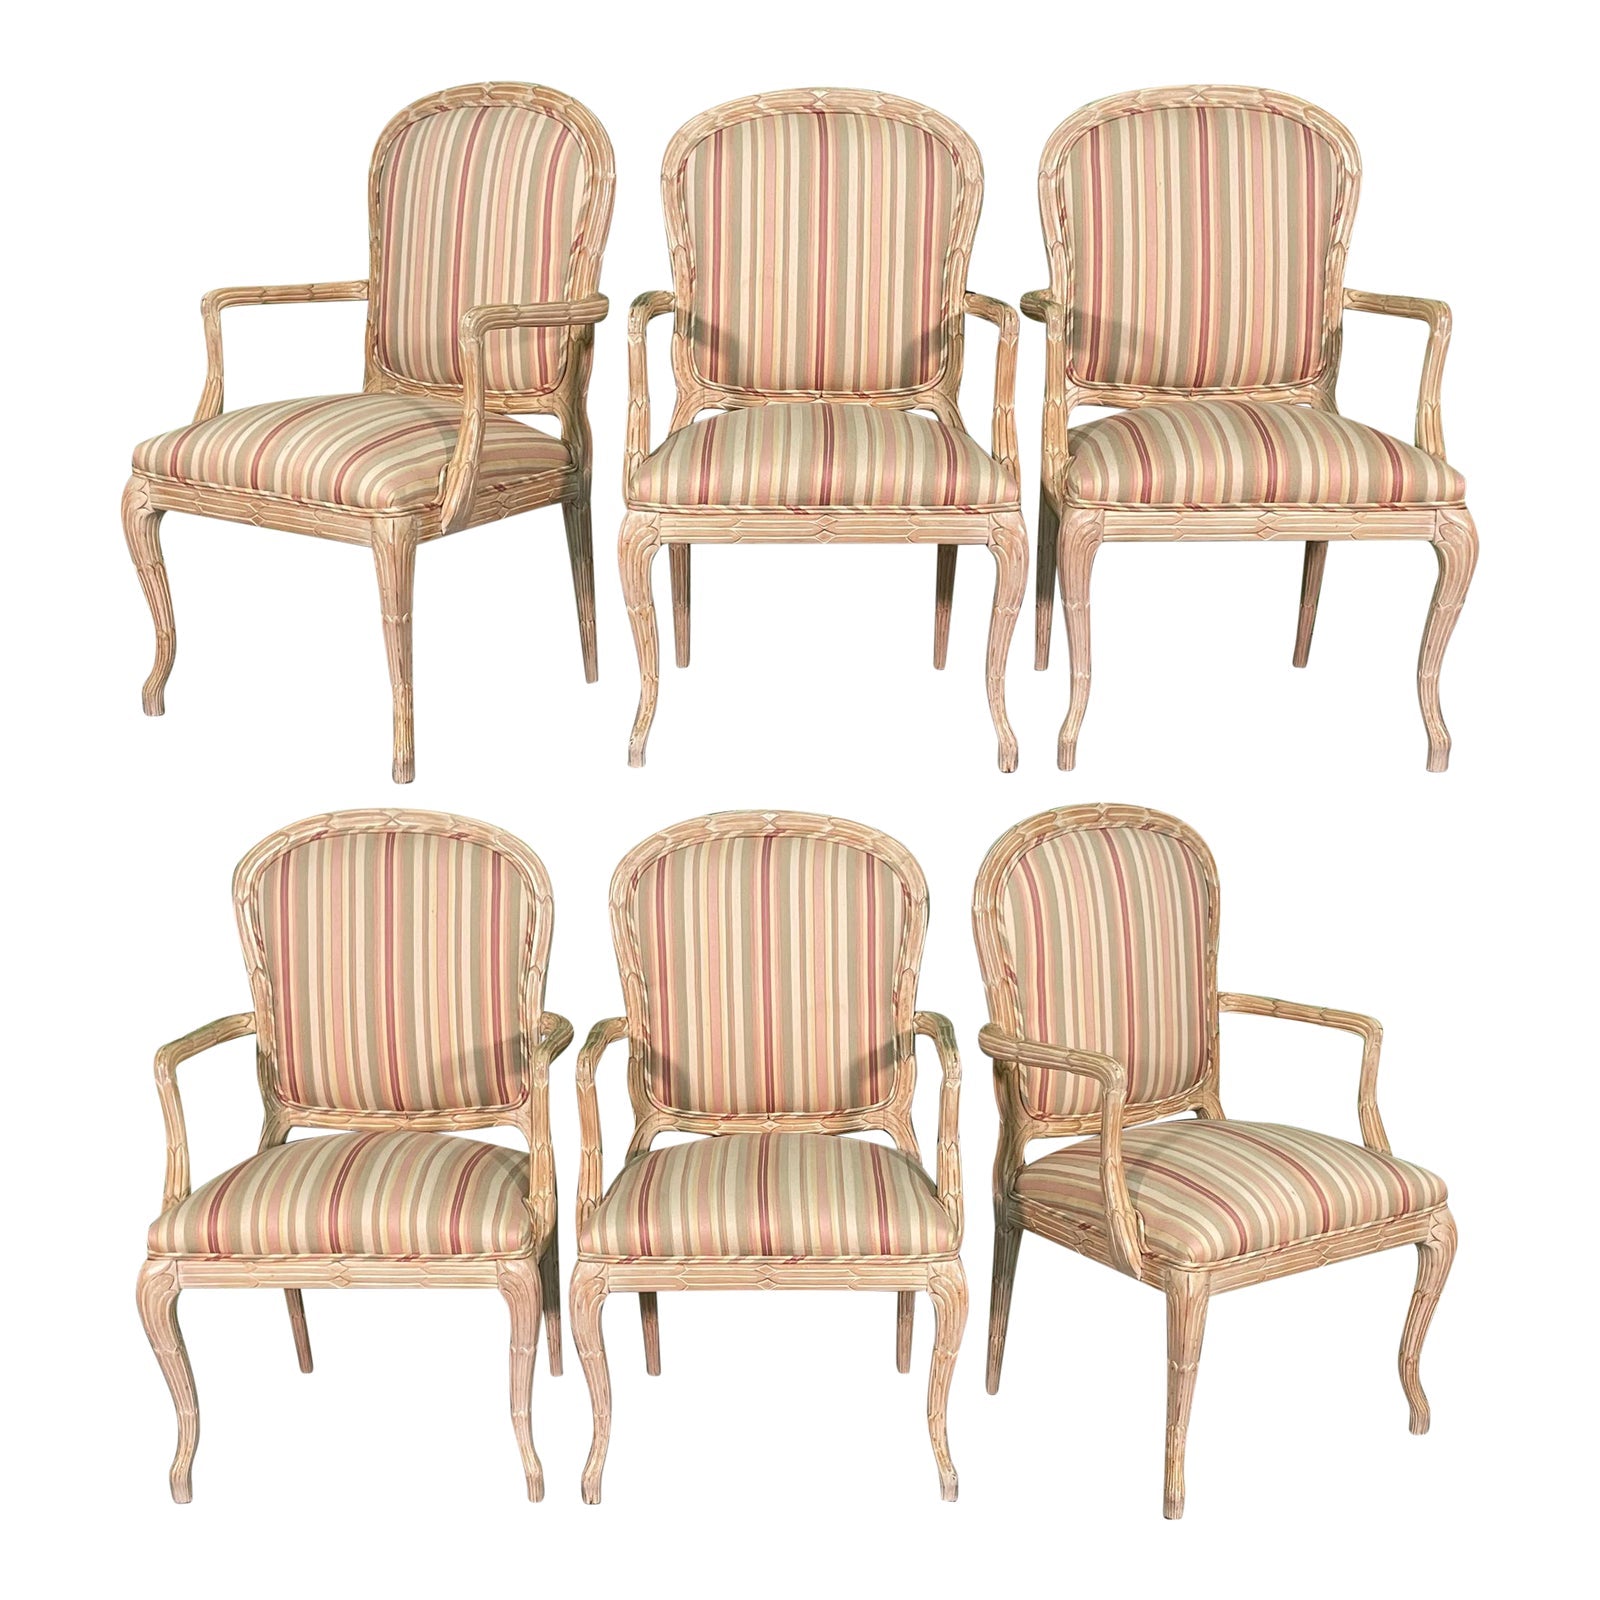 Vintage Faux Bois Carved Twig Dining Chairs, Set of 6